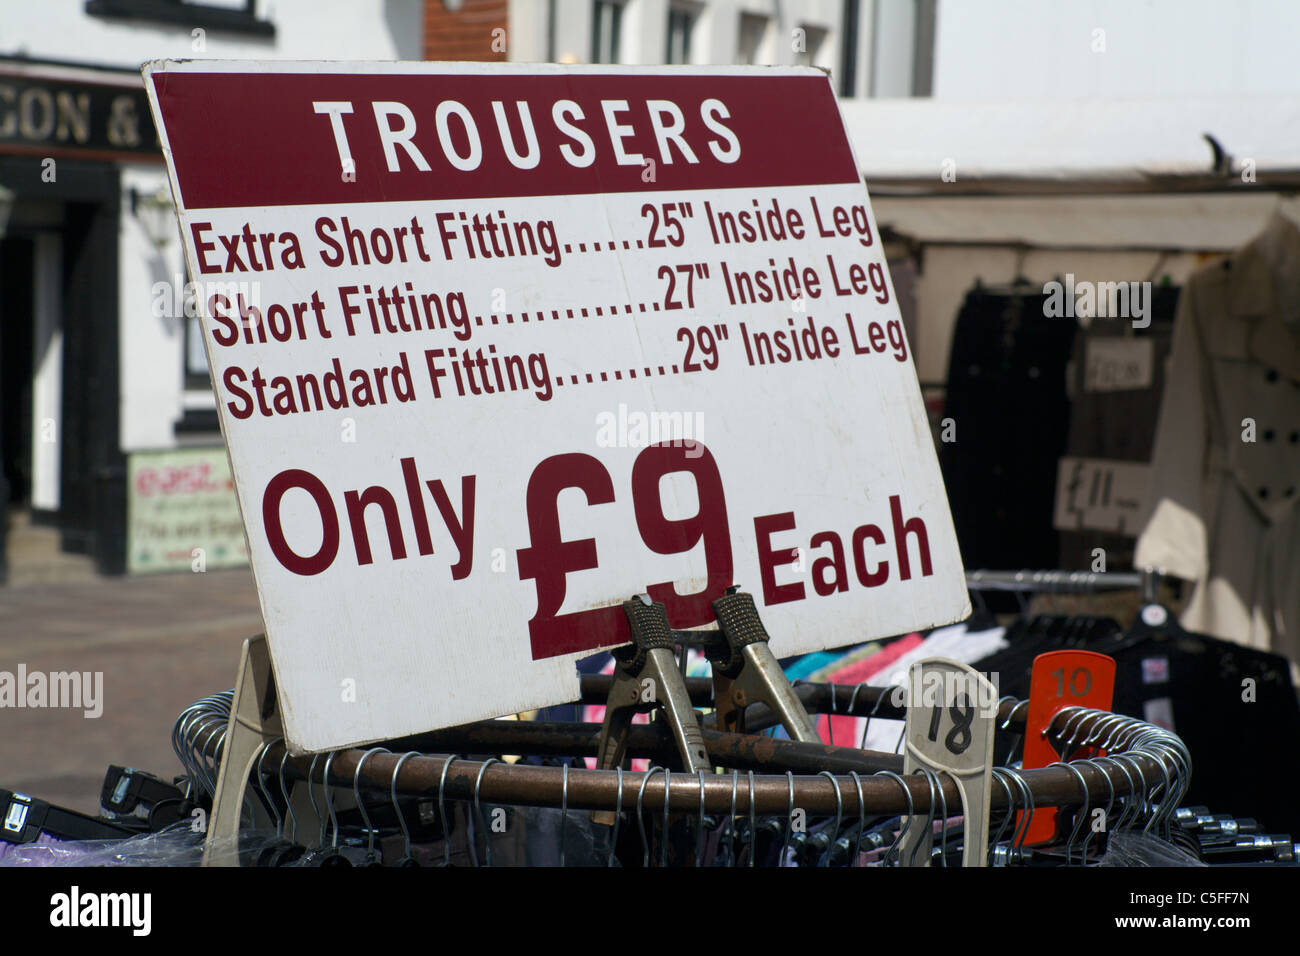 Sign showing prices of trousers on sale in market Newbury Berkshire England UK Stock Photo